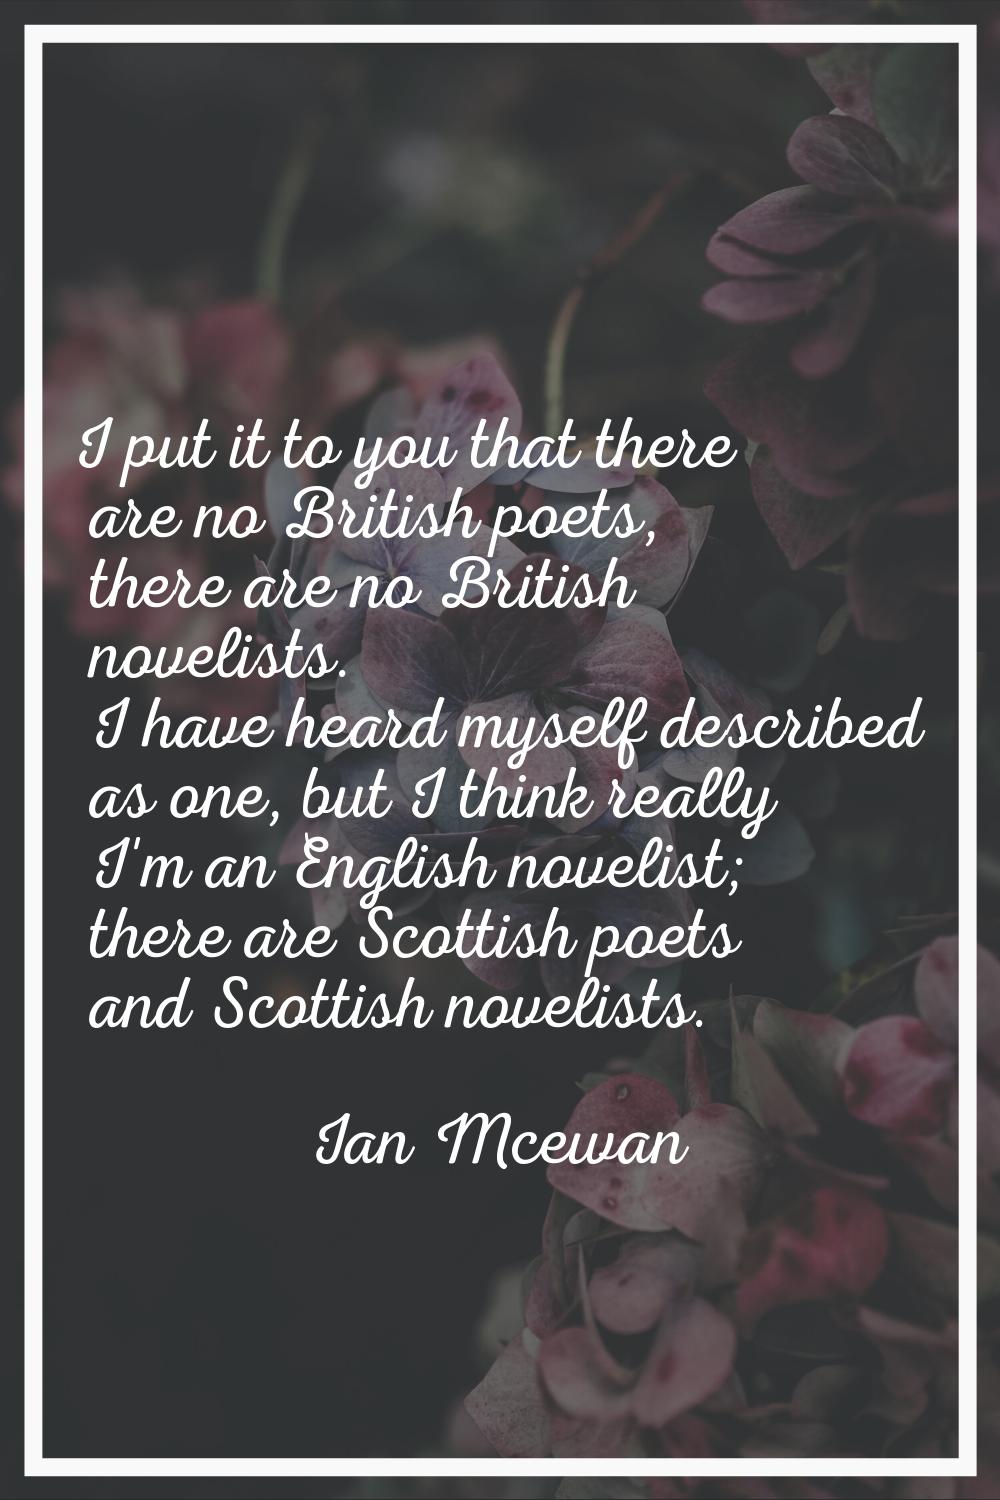 I put it to you that there are no British poets, there are no British novelists. I have heard mysel